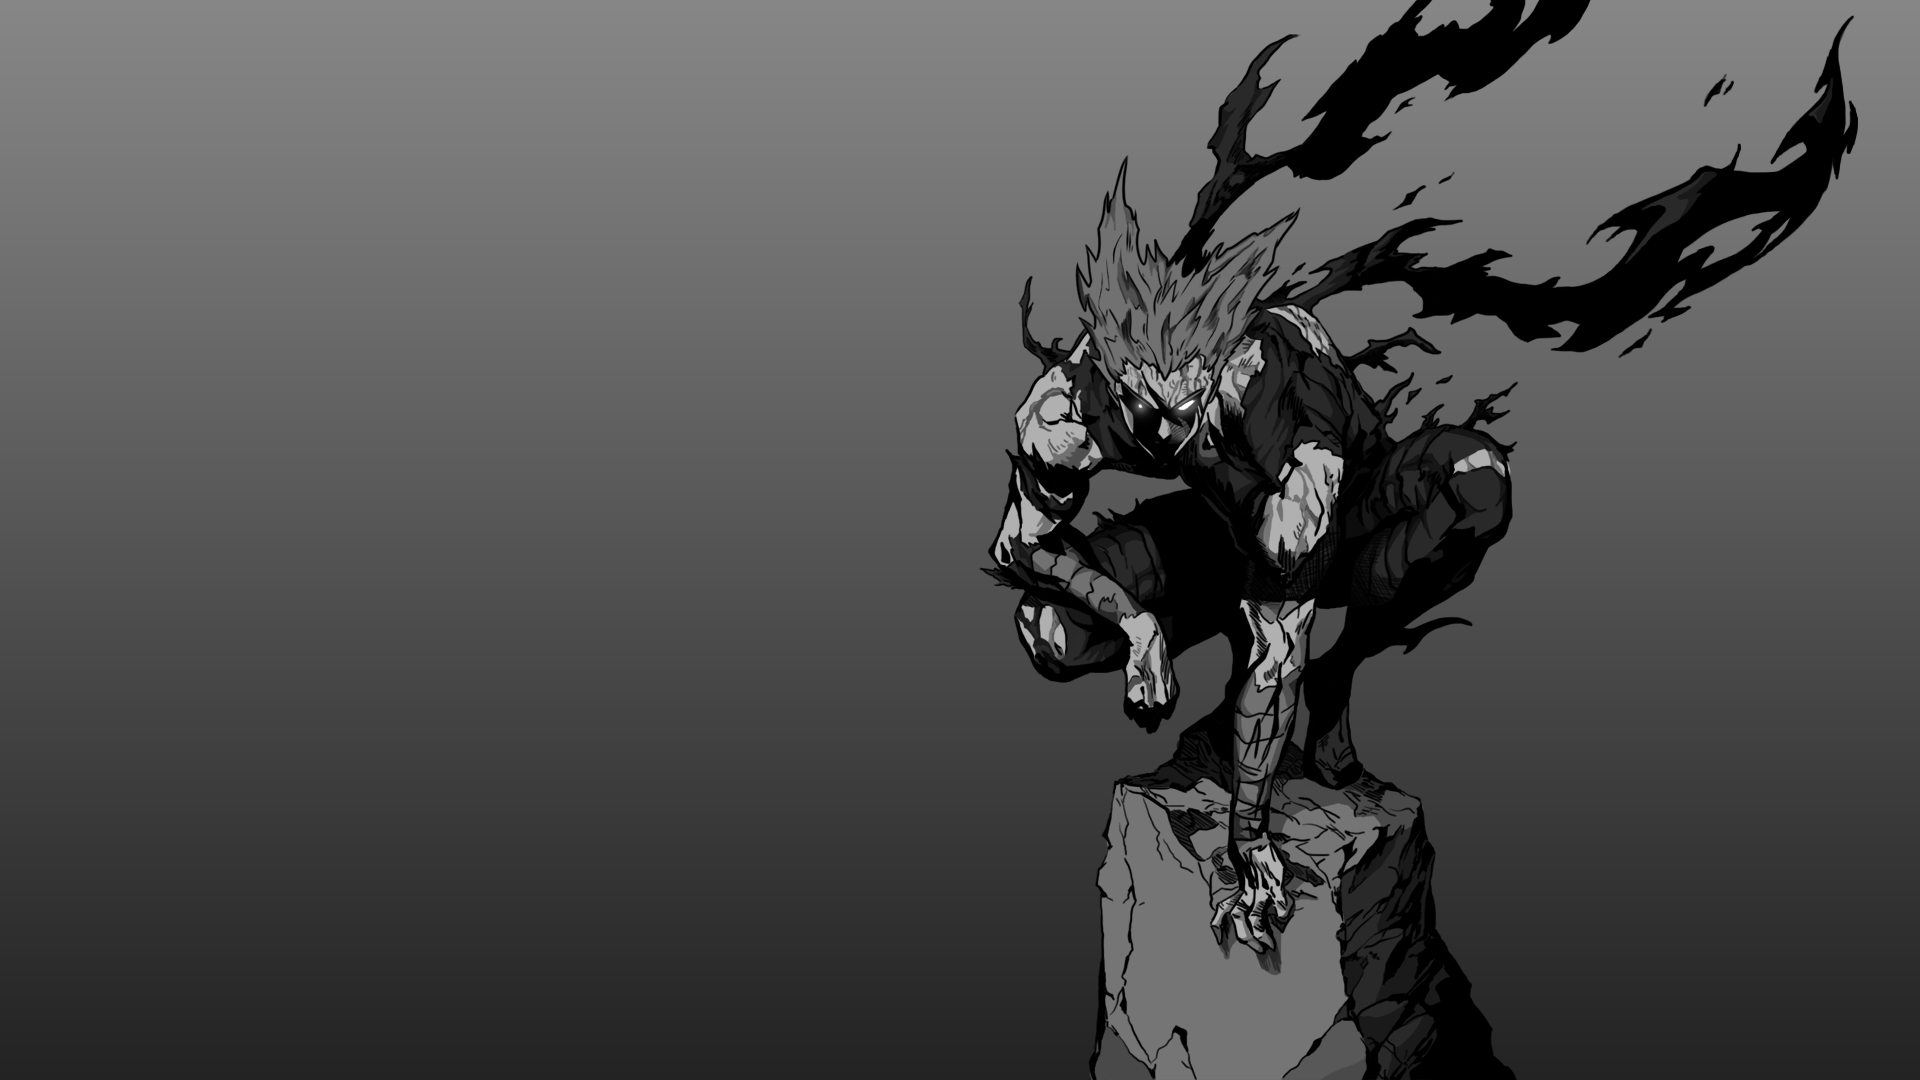 My favorite Garou pose. Took me days to redraw it. First post here